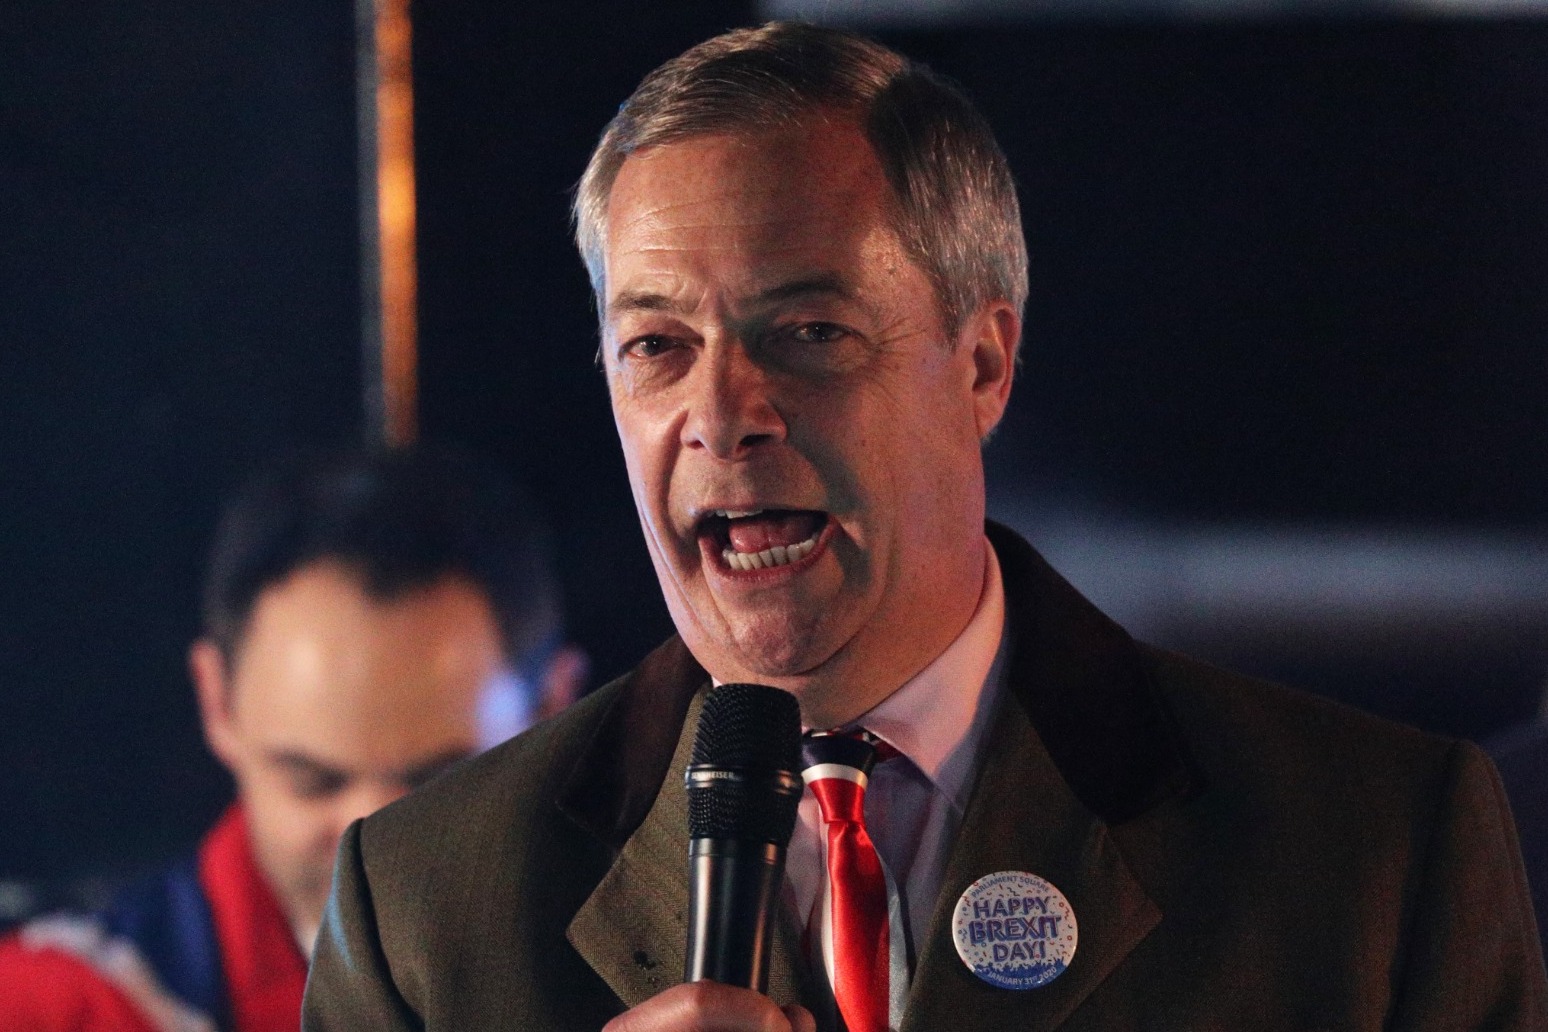 Farage praises Government plans to revoke banks’ licences over free speech curbs 